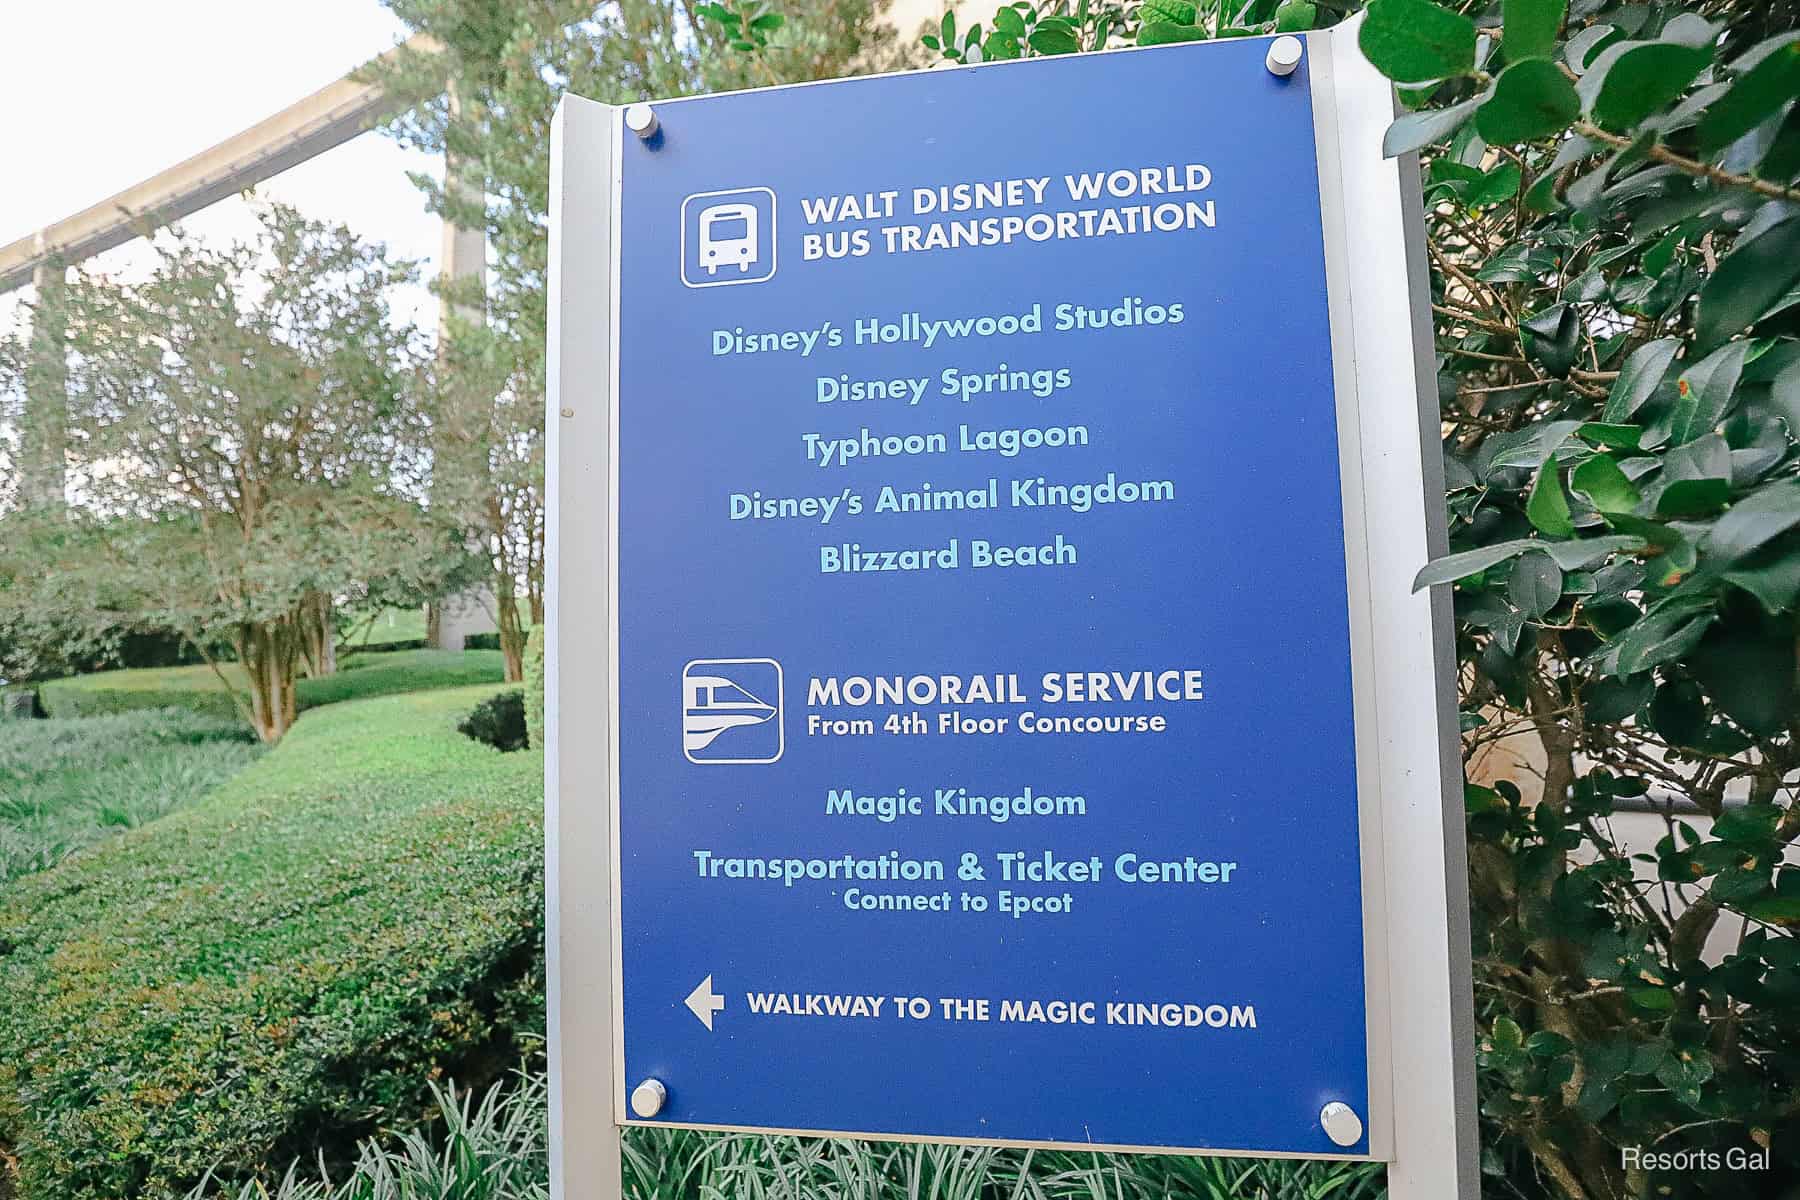 a sign that shows the transportation options provided at Disney's Contemporary with a directional to the Magic Kingdom walkway 